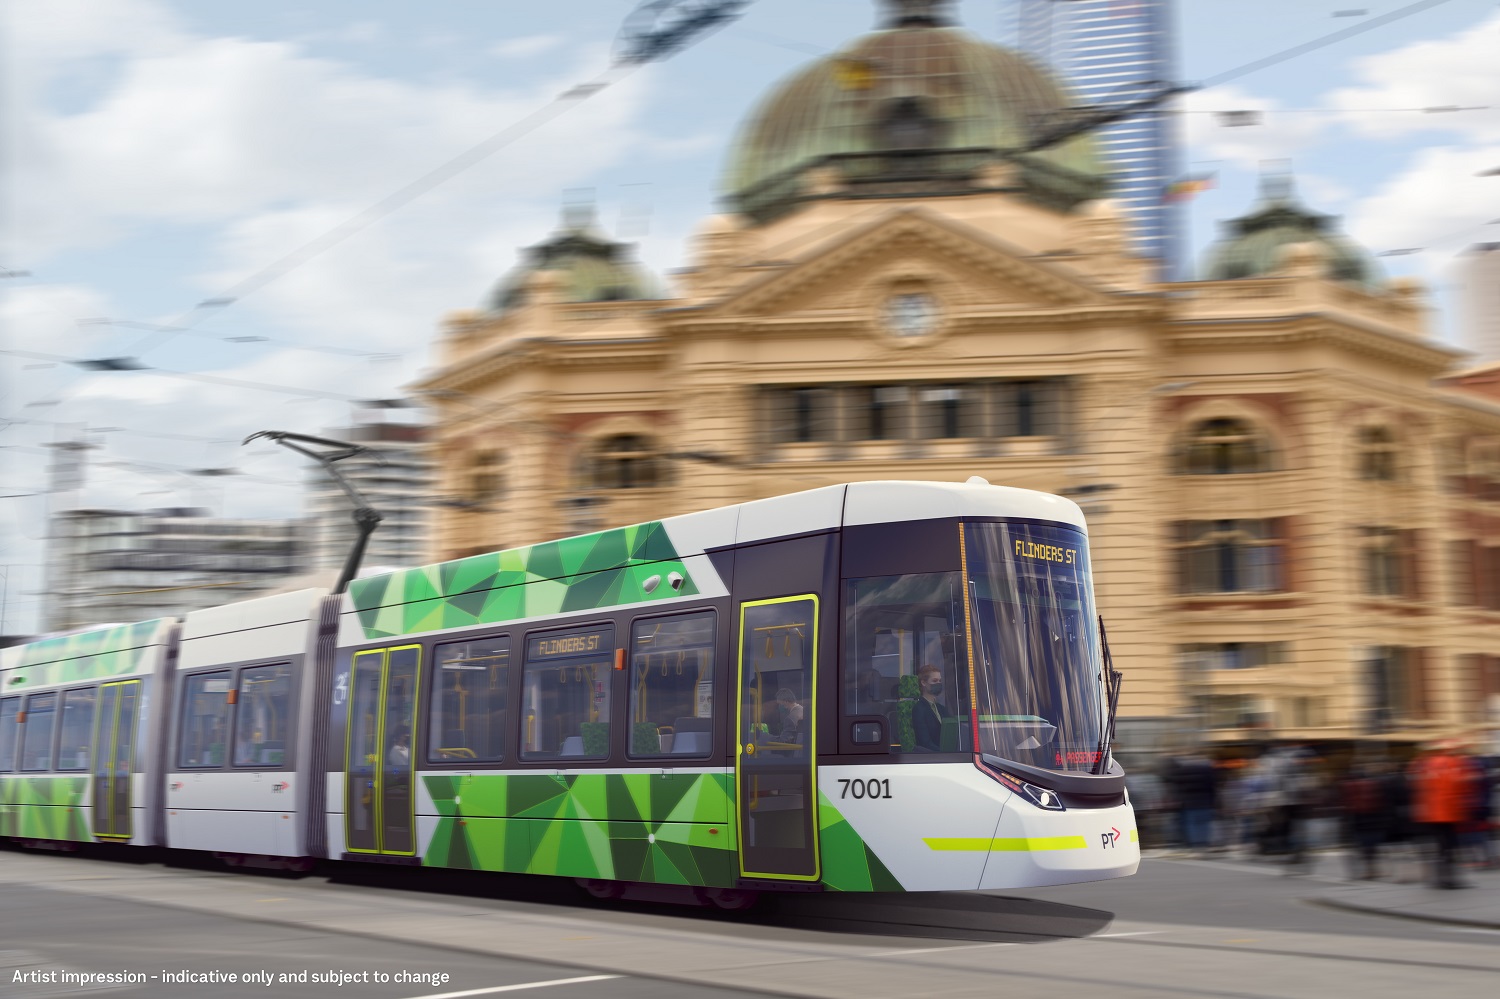 The Flexity 2 light rail vehicles will go into service on the world’s largest urban tram network in Melbourne